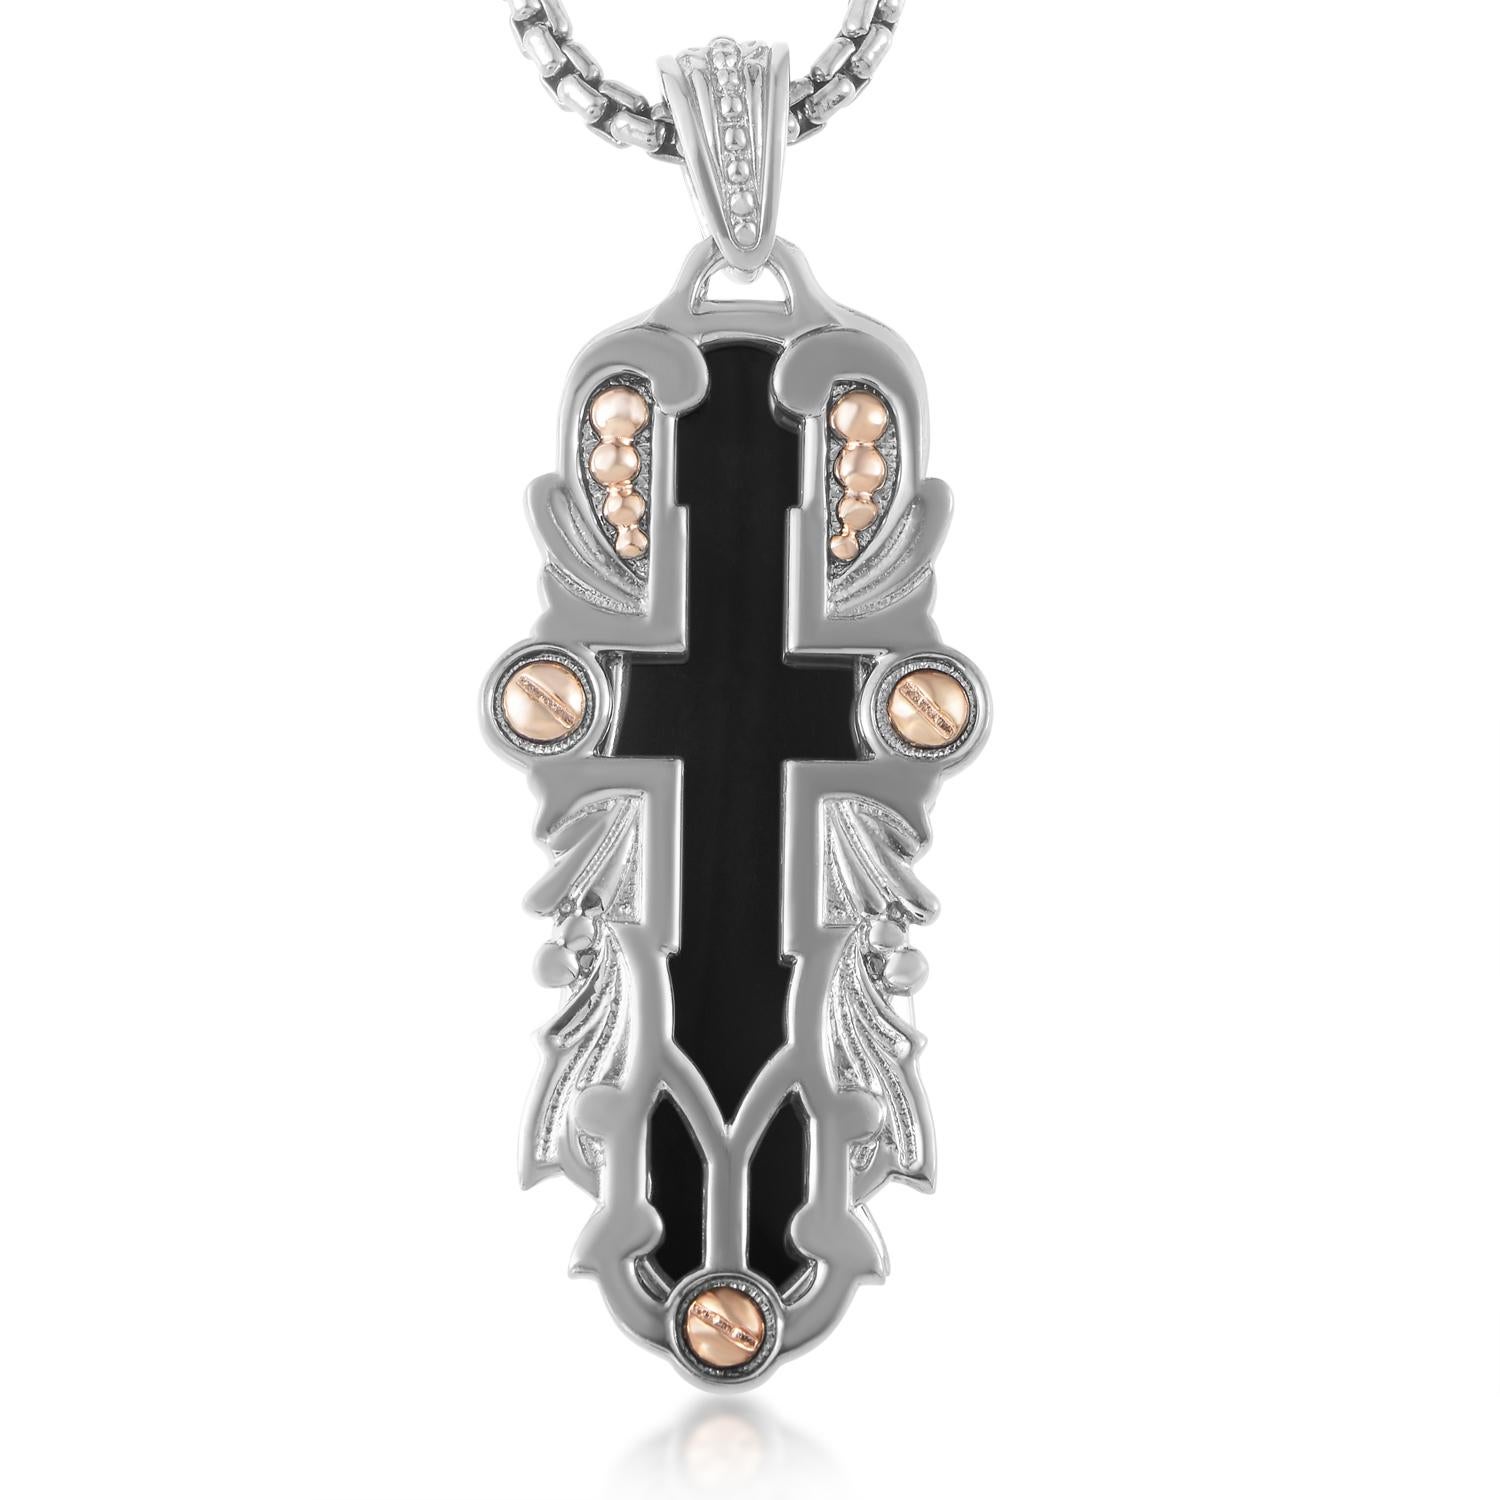 Combining the wonderfully bright reflective surface of silver and the astonishing darkness of the captivating onyx stone, Stephen Webster presents this splendid necklace which features an intriguing design and boasts a touch of warm radiance in the